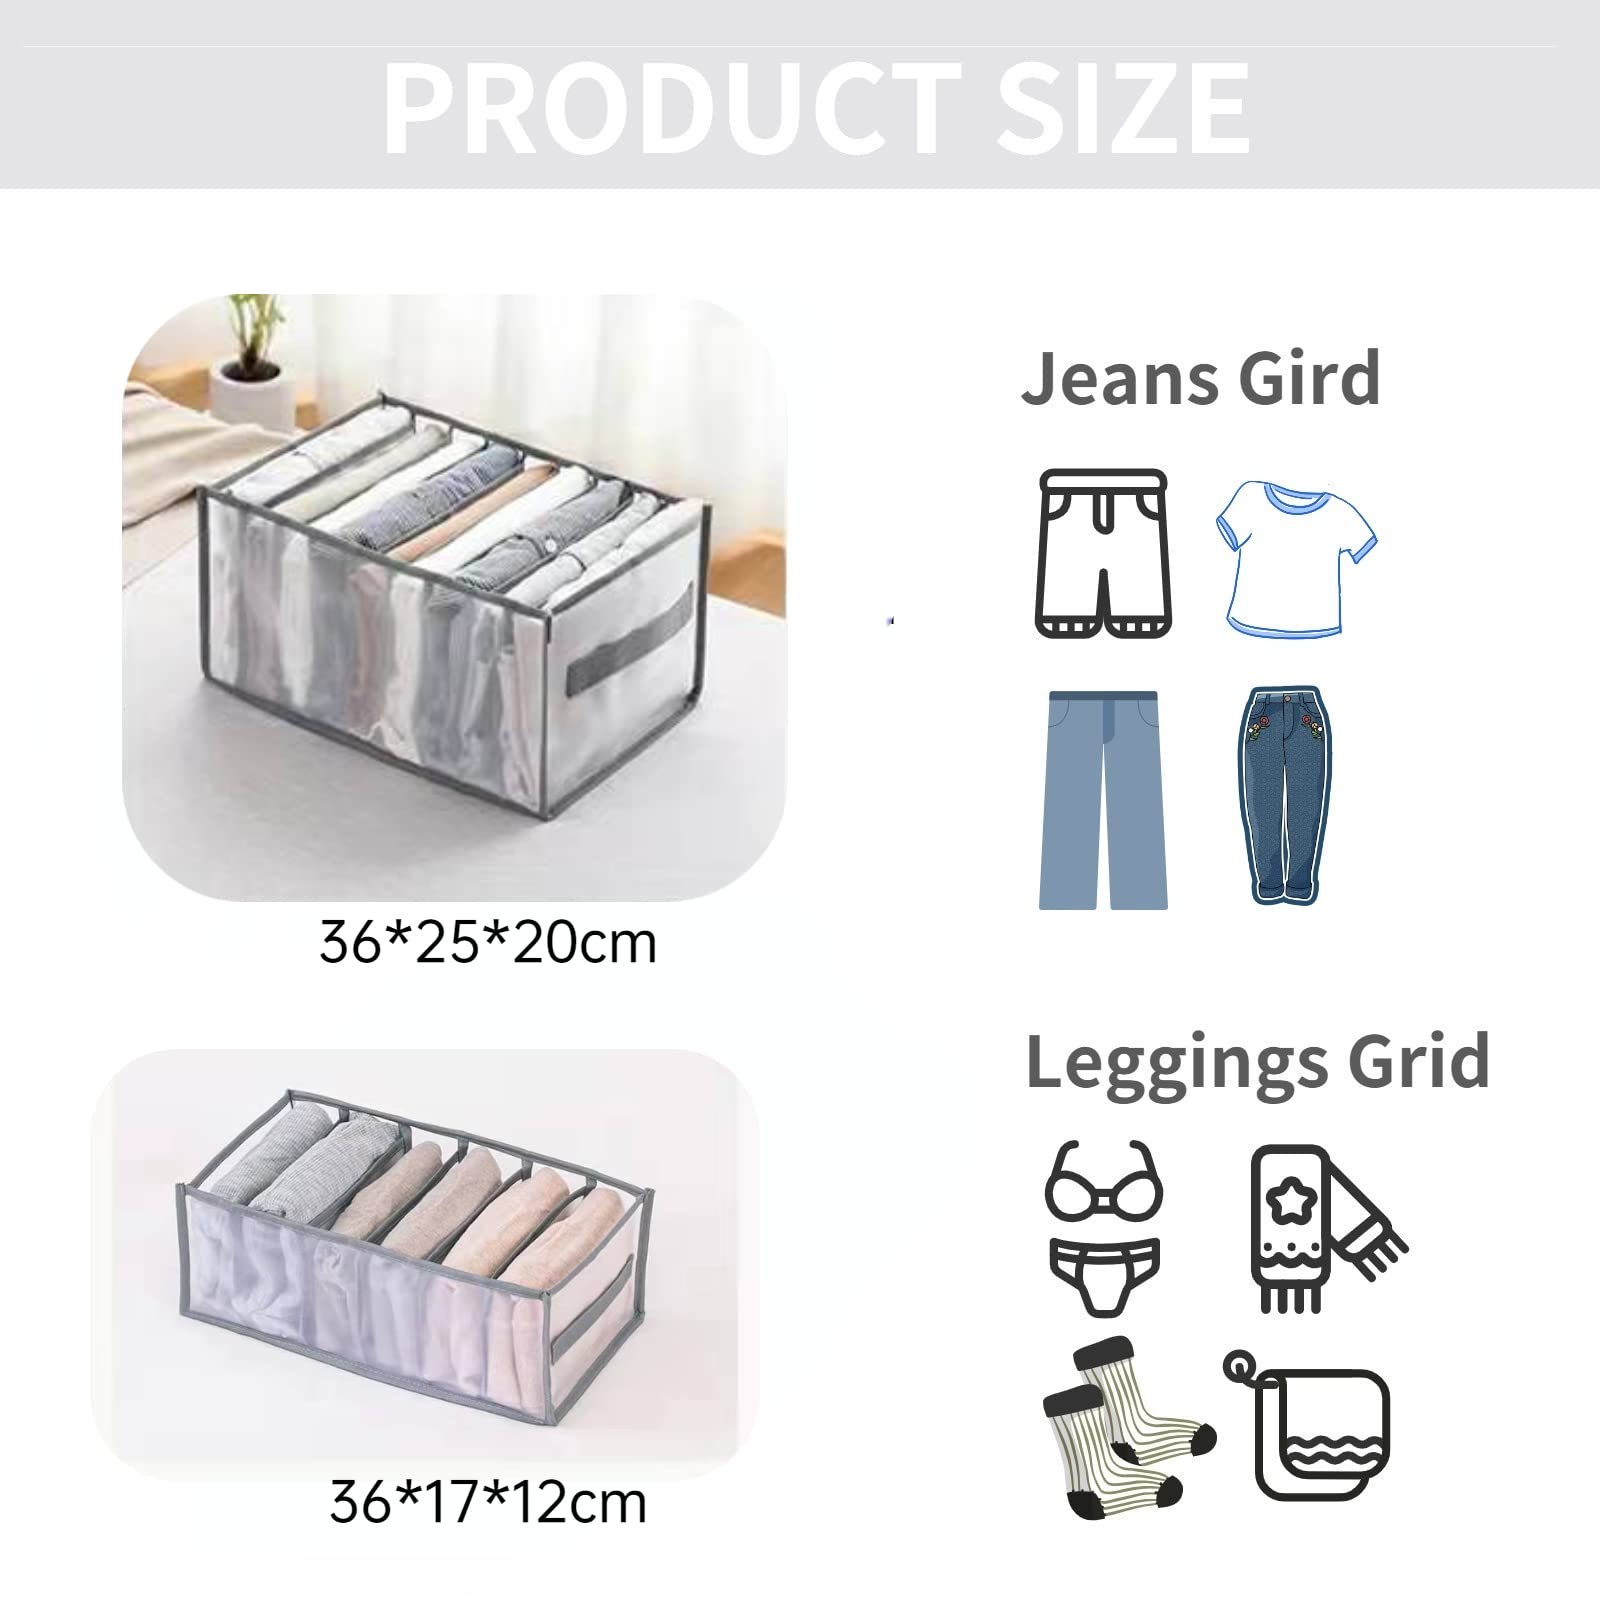 Wardrobe Clothes Organizer, 9 Grids Upgraded Washable Closet Organizers and Storage, Jeans Leggings Compartment Storage Box, Foldable Drawer Mesh Separation Box for Jeans, Shirt, Legging, Grey (4Pcs)